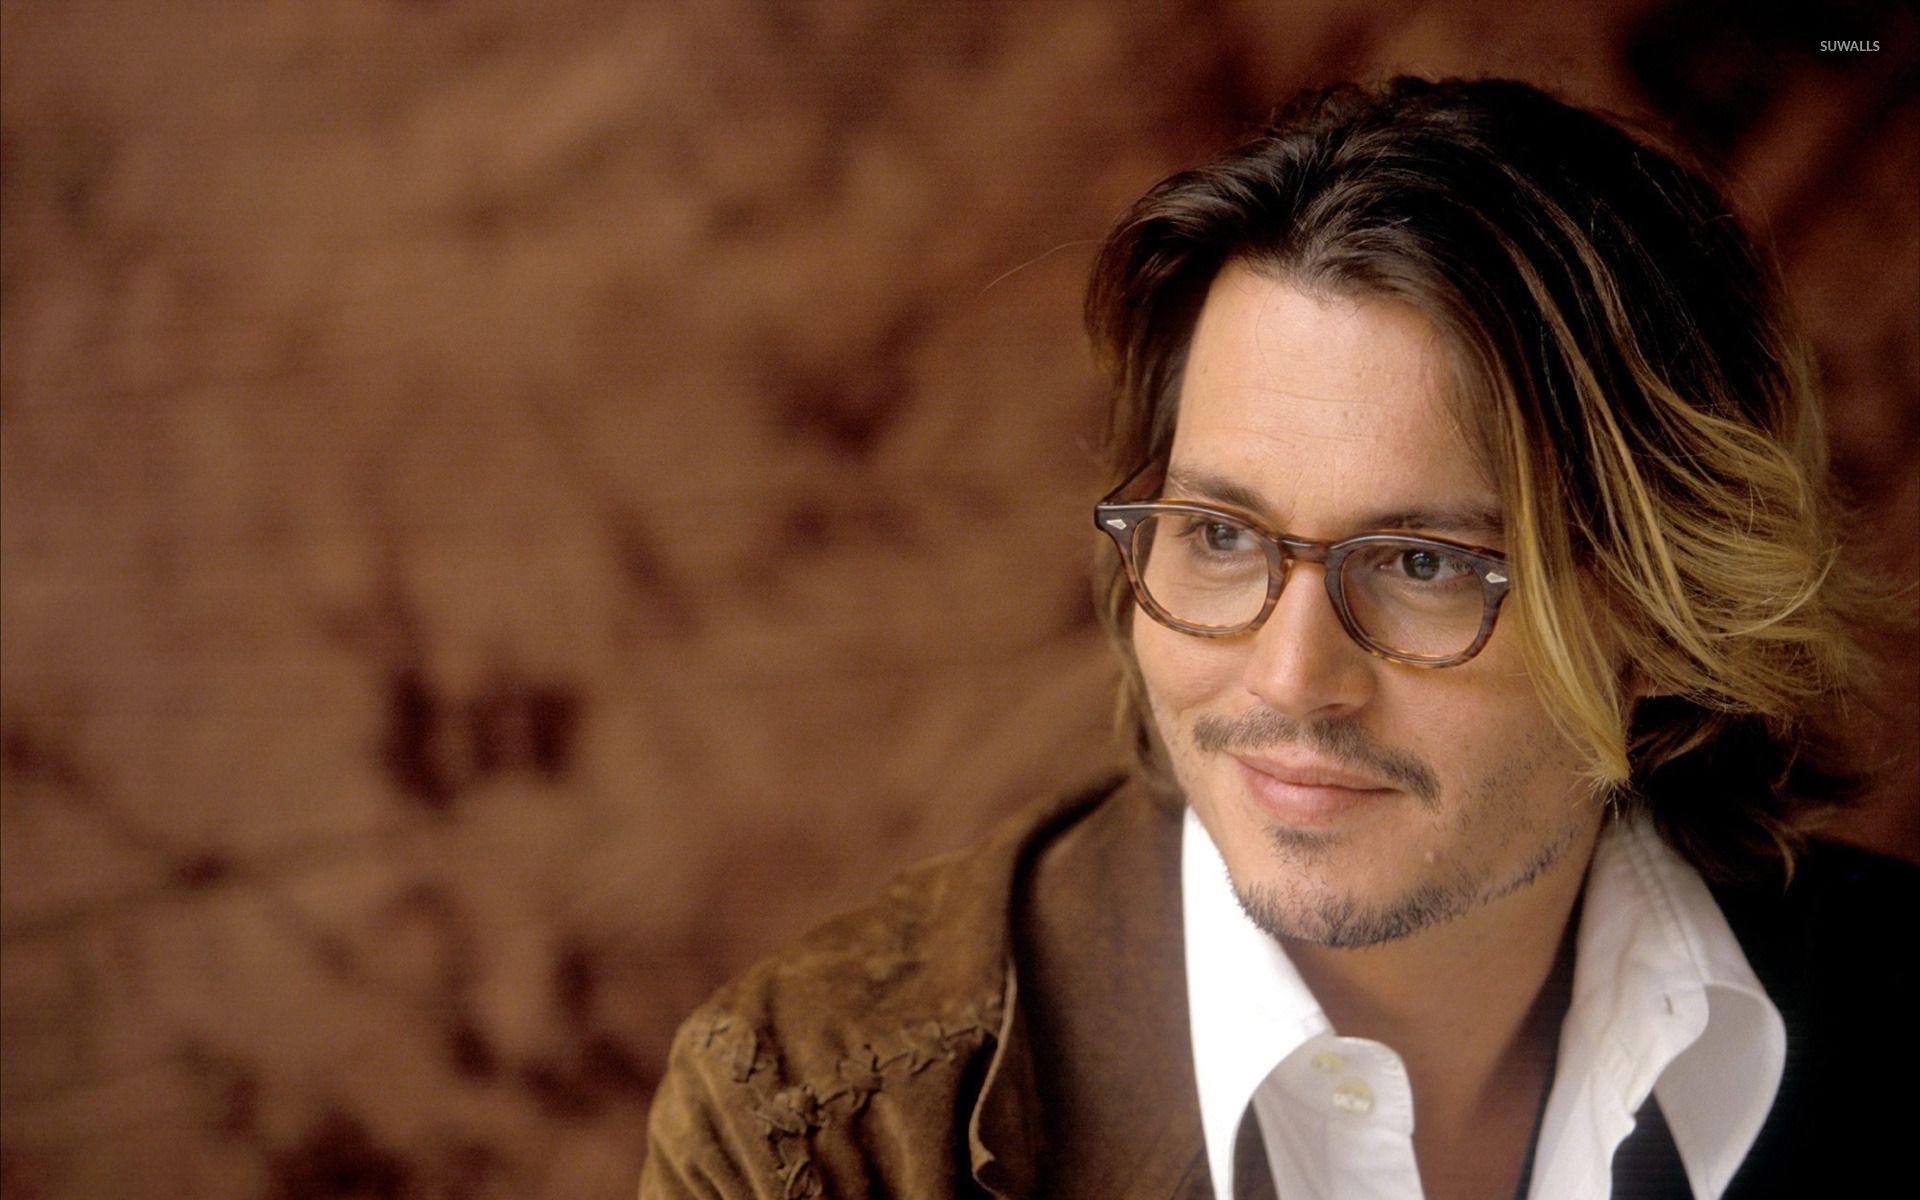 Johnny Depp Wallpapers Top Free Johnny Depp Backgrounds Wallpaperaccess Which johnny depp movie should you watch based on the first letter of your name? johnny depp wallpapers top free